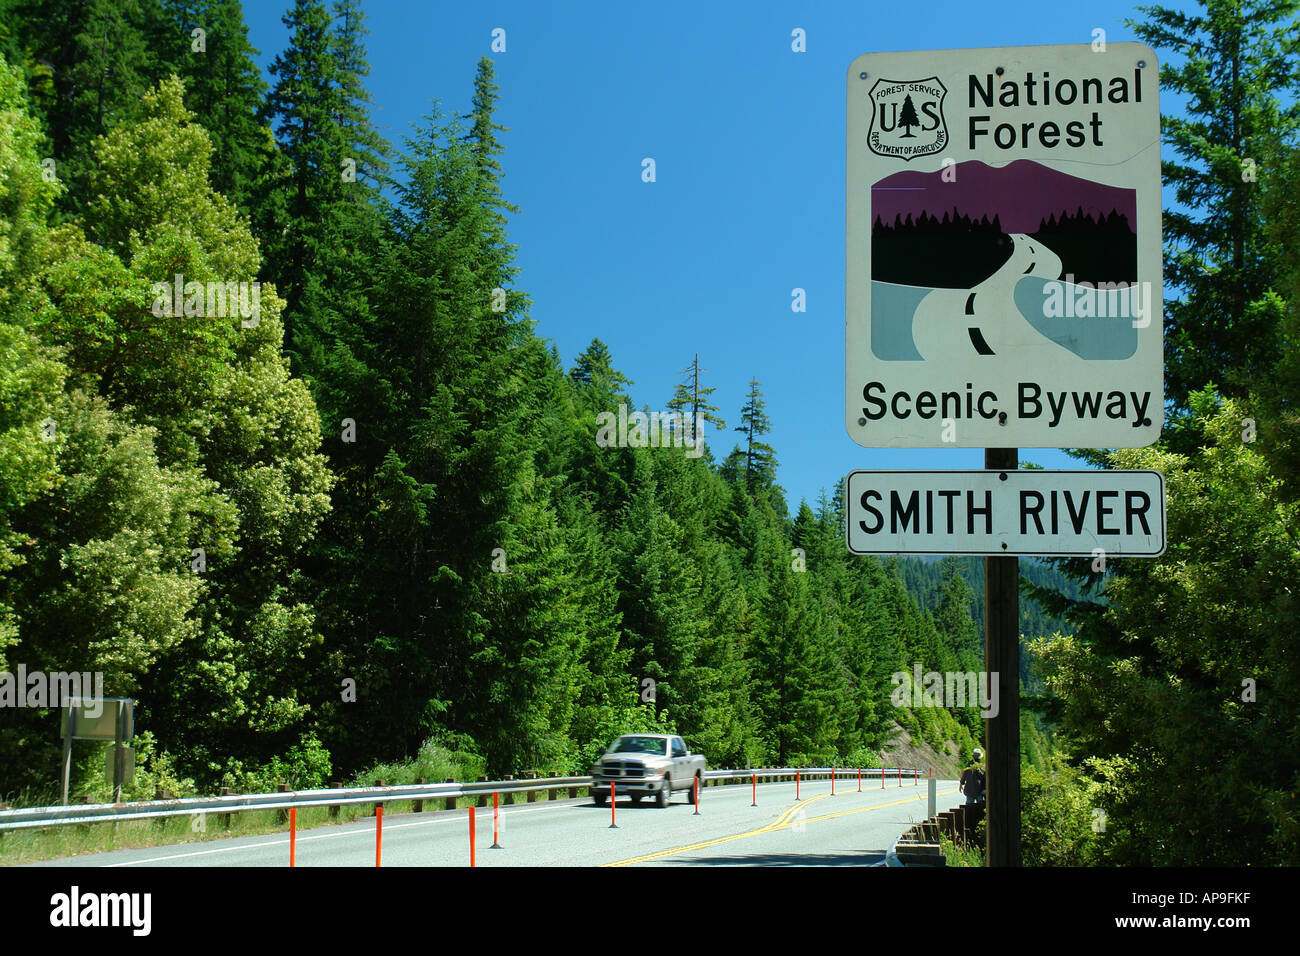 AJD51227, Smith River National Recreation Area, CA, California, Six Rivers National Forest Scenic Byway, Rt. 199, road sign Stock Photo